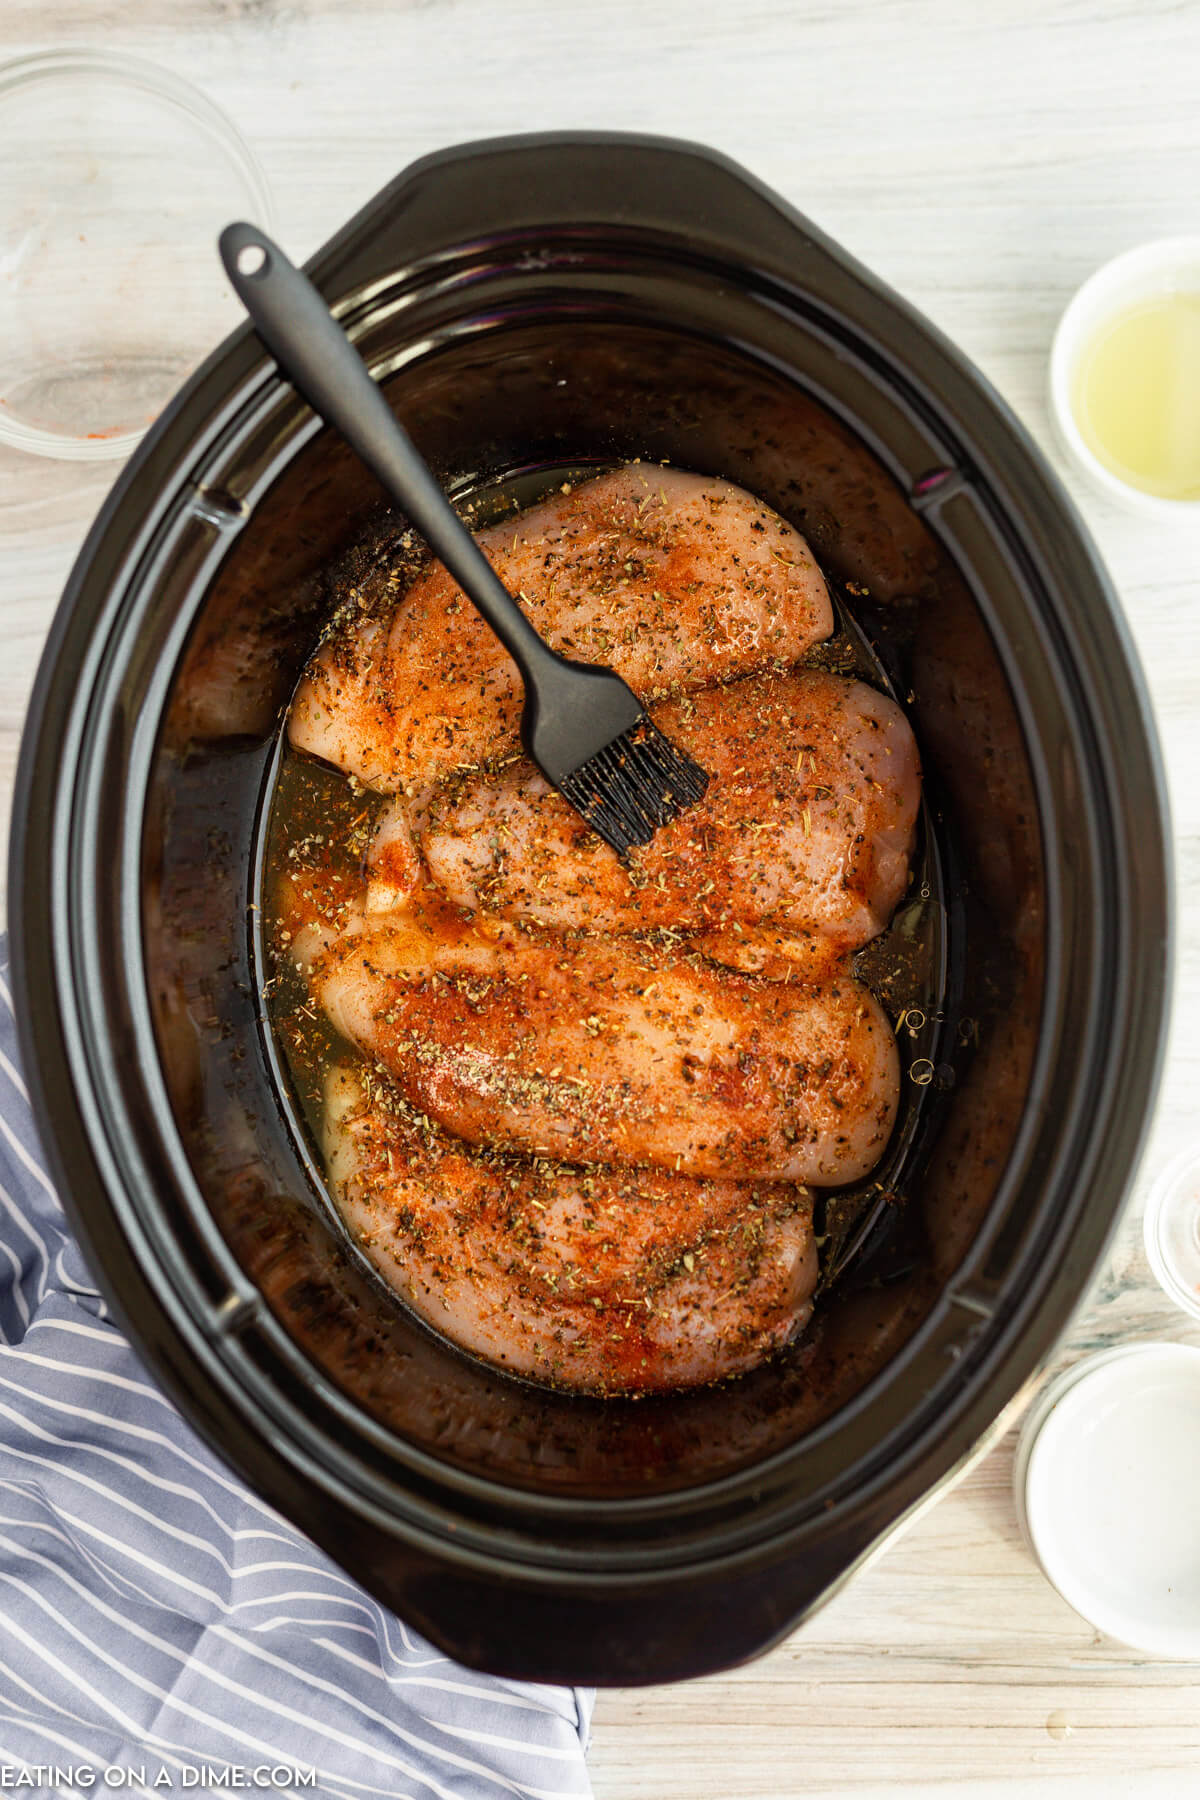 Basting chicken with seasoning and oil in the slow cooker